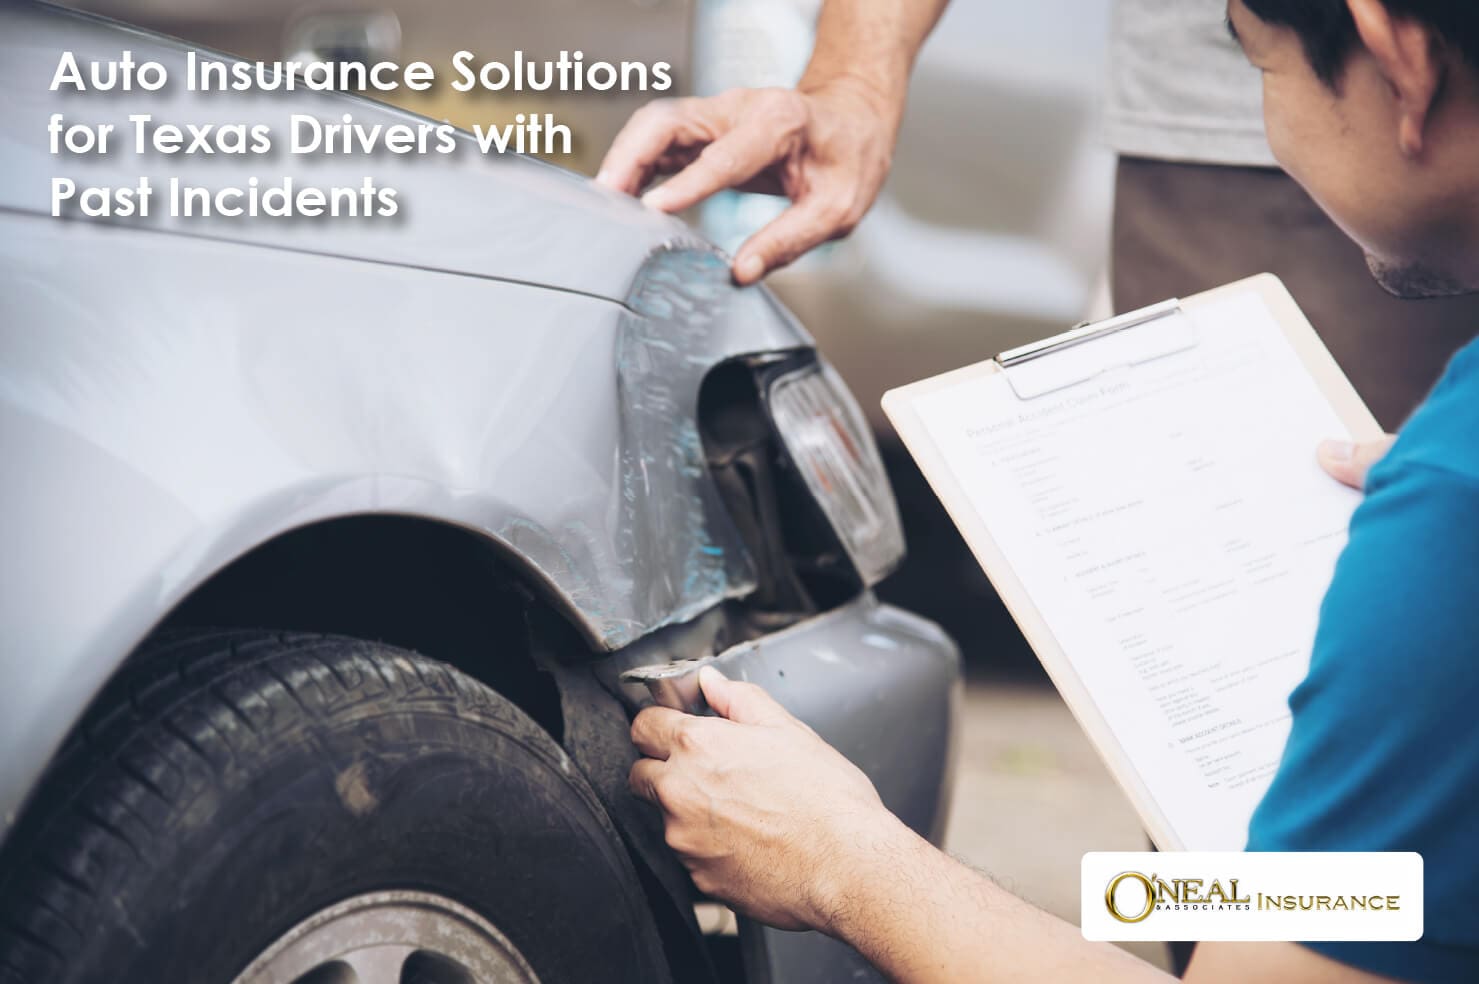 Auto Insurance Solutions for Texas Drivers with Past Incidents